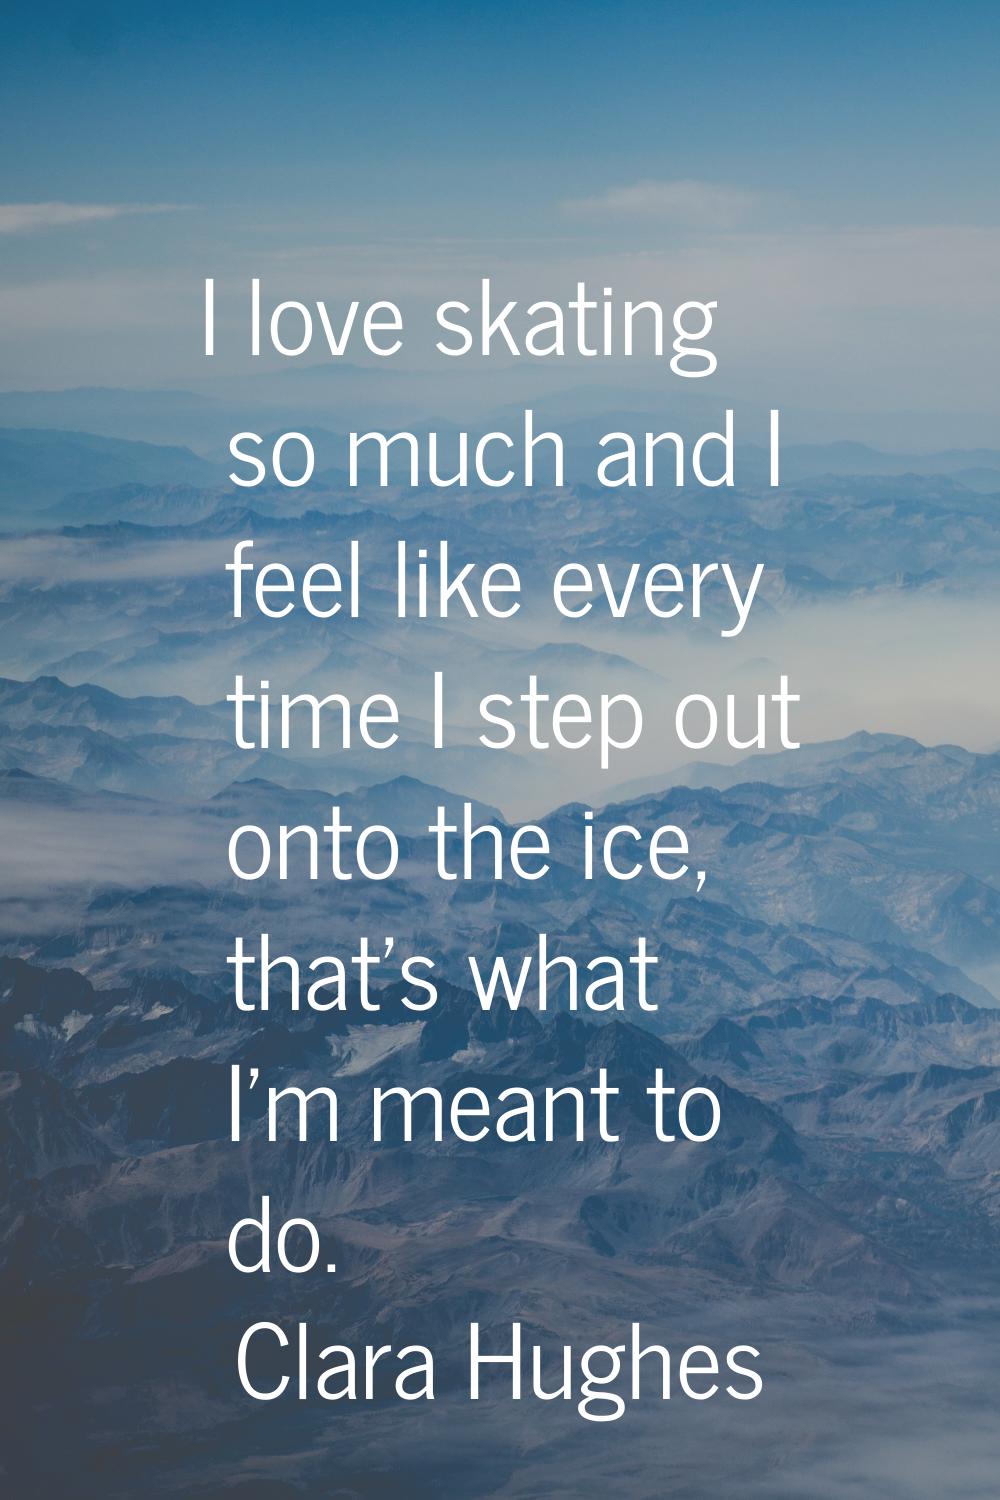 I love skating so much and I feel like every time I step out onto the ice, that's what I'm meant to